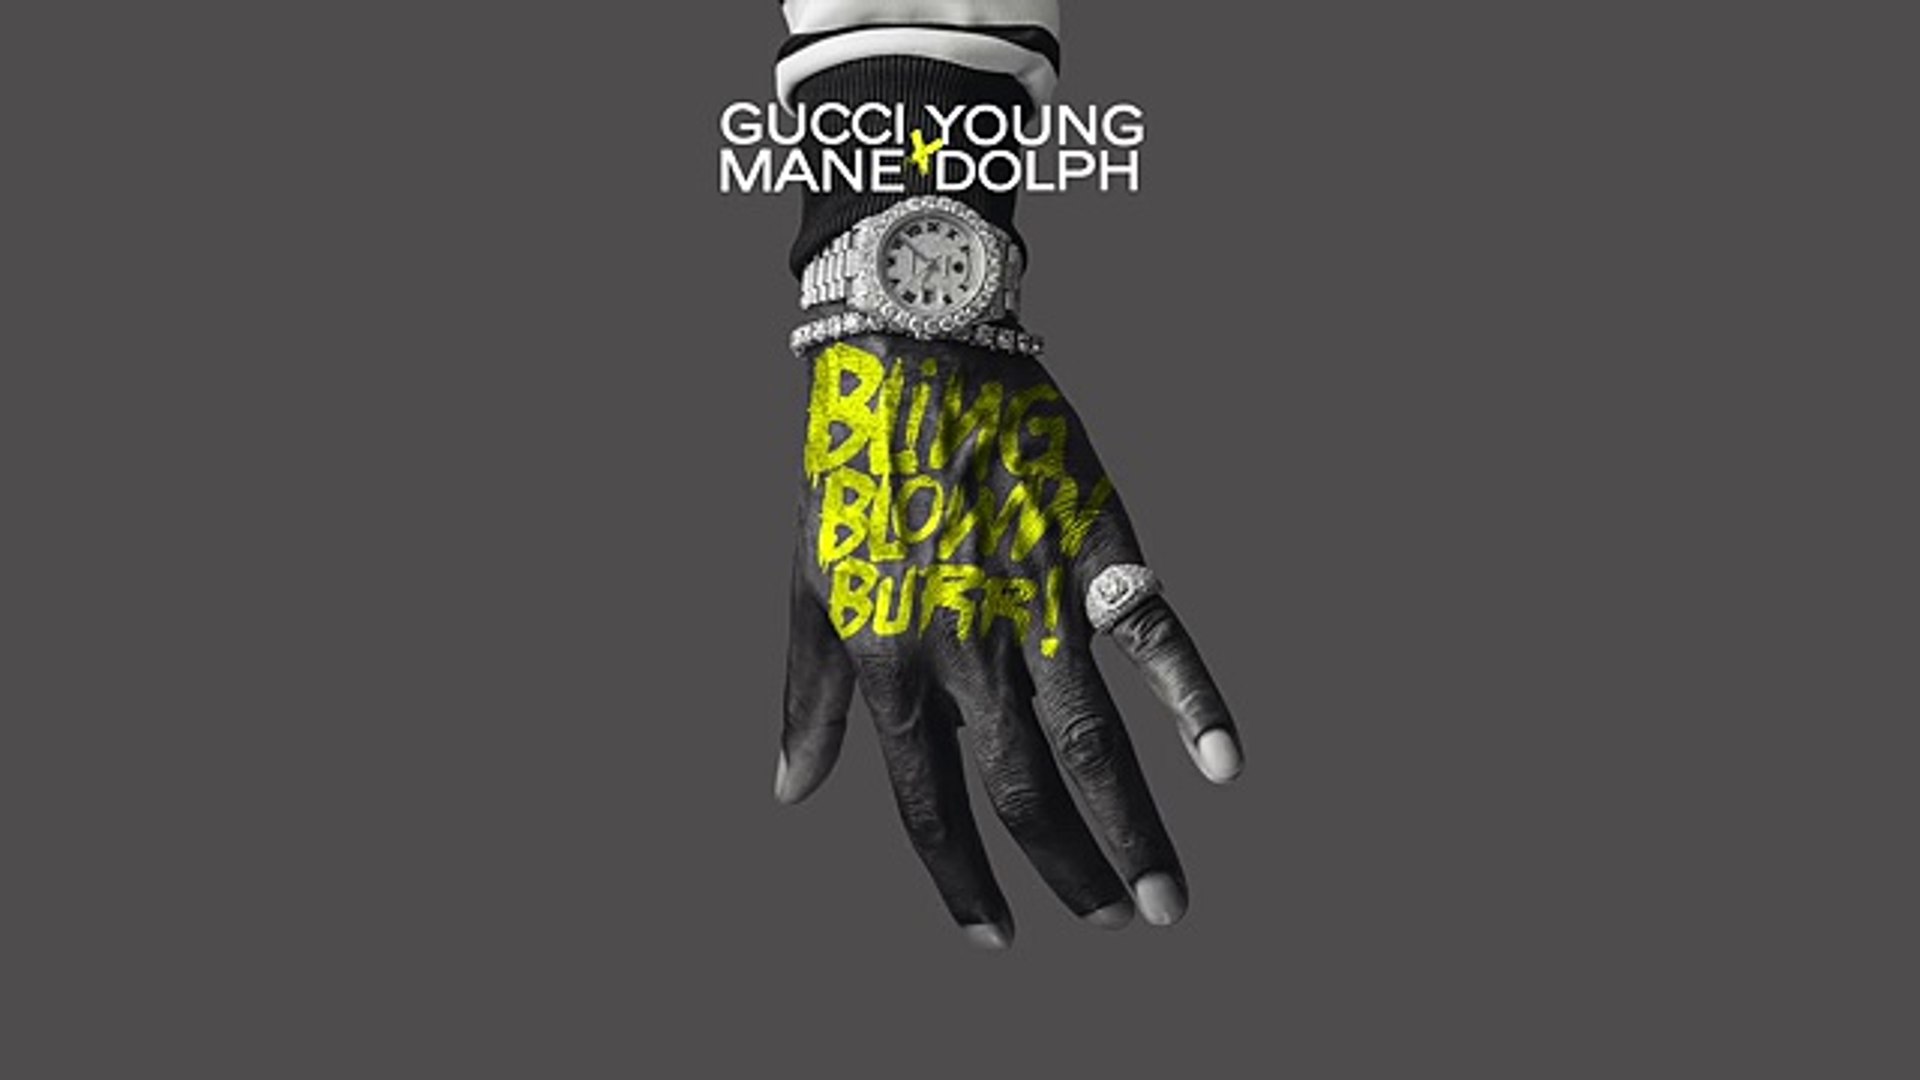 Gucci Mane - Bling Bloww Burr! feat. Young Dolph [Official Audio ...